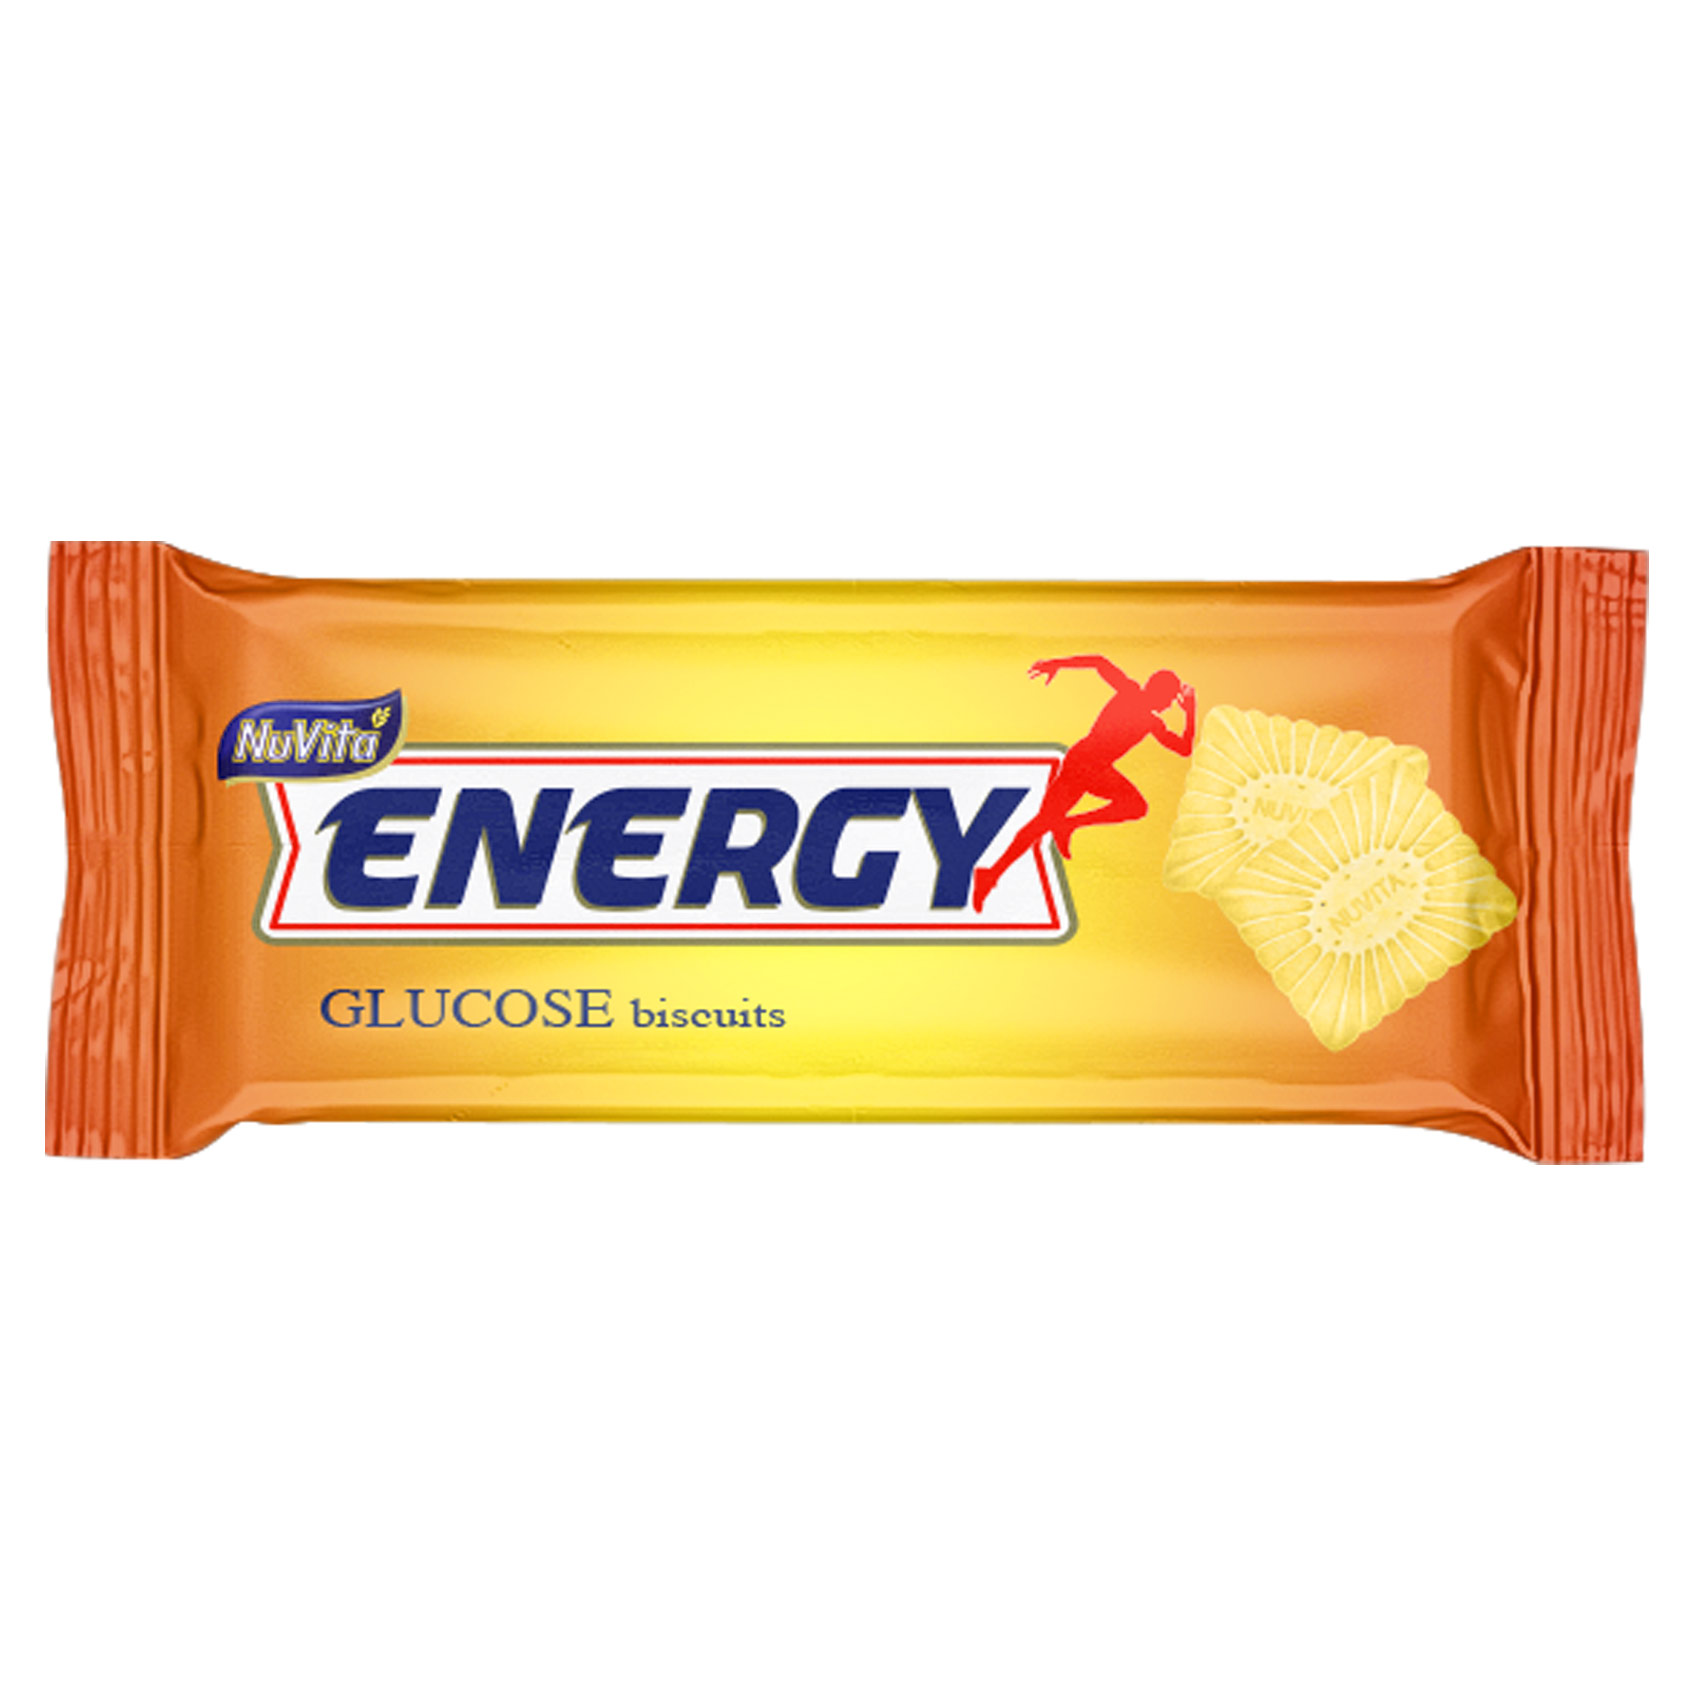 NuVita Energy glucose Biscuits 75g